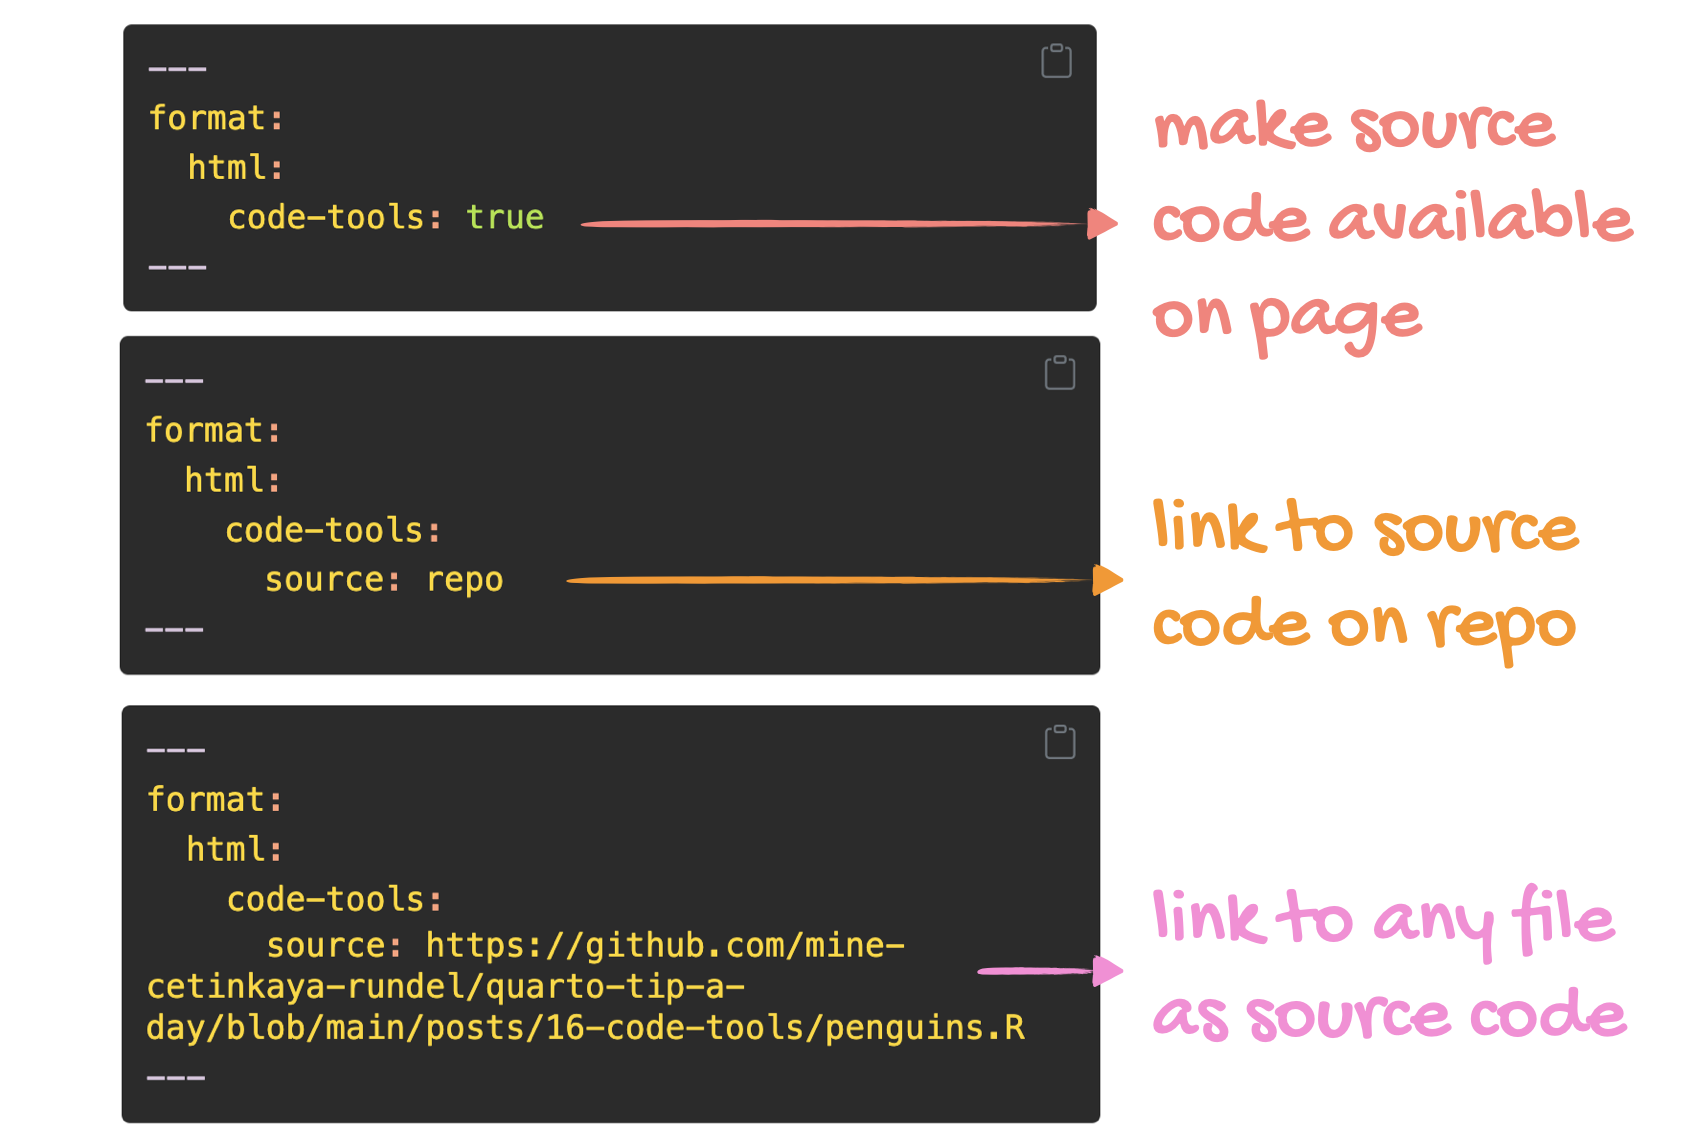 Three ways of linking to source code from within your document, each presented with its associated YAML. (1) Make source code available on page. (2) Link to source code on repo. (3) Link to any file as source code. The associated YAML fields are provided in the blog post.